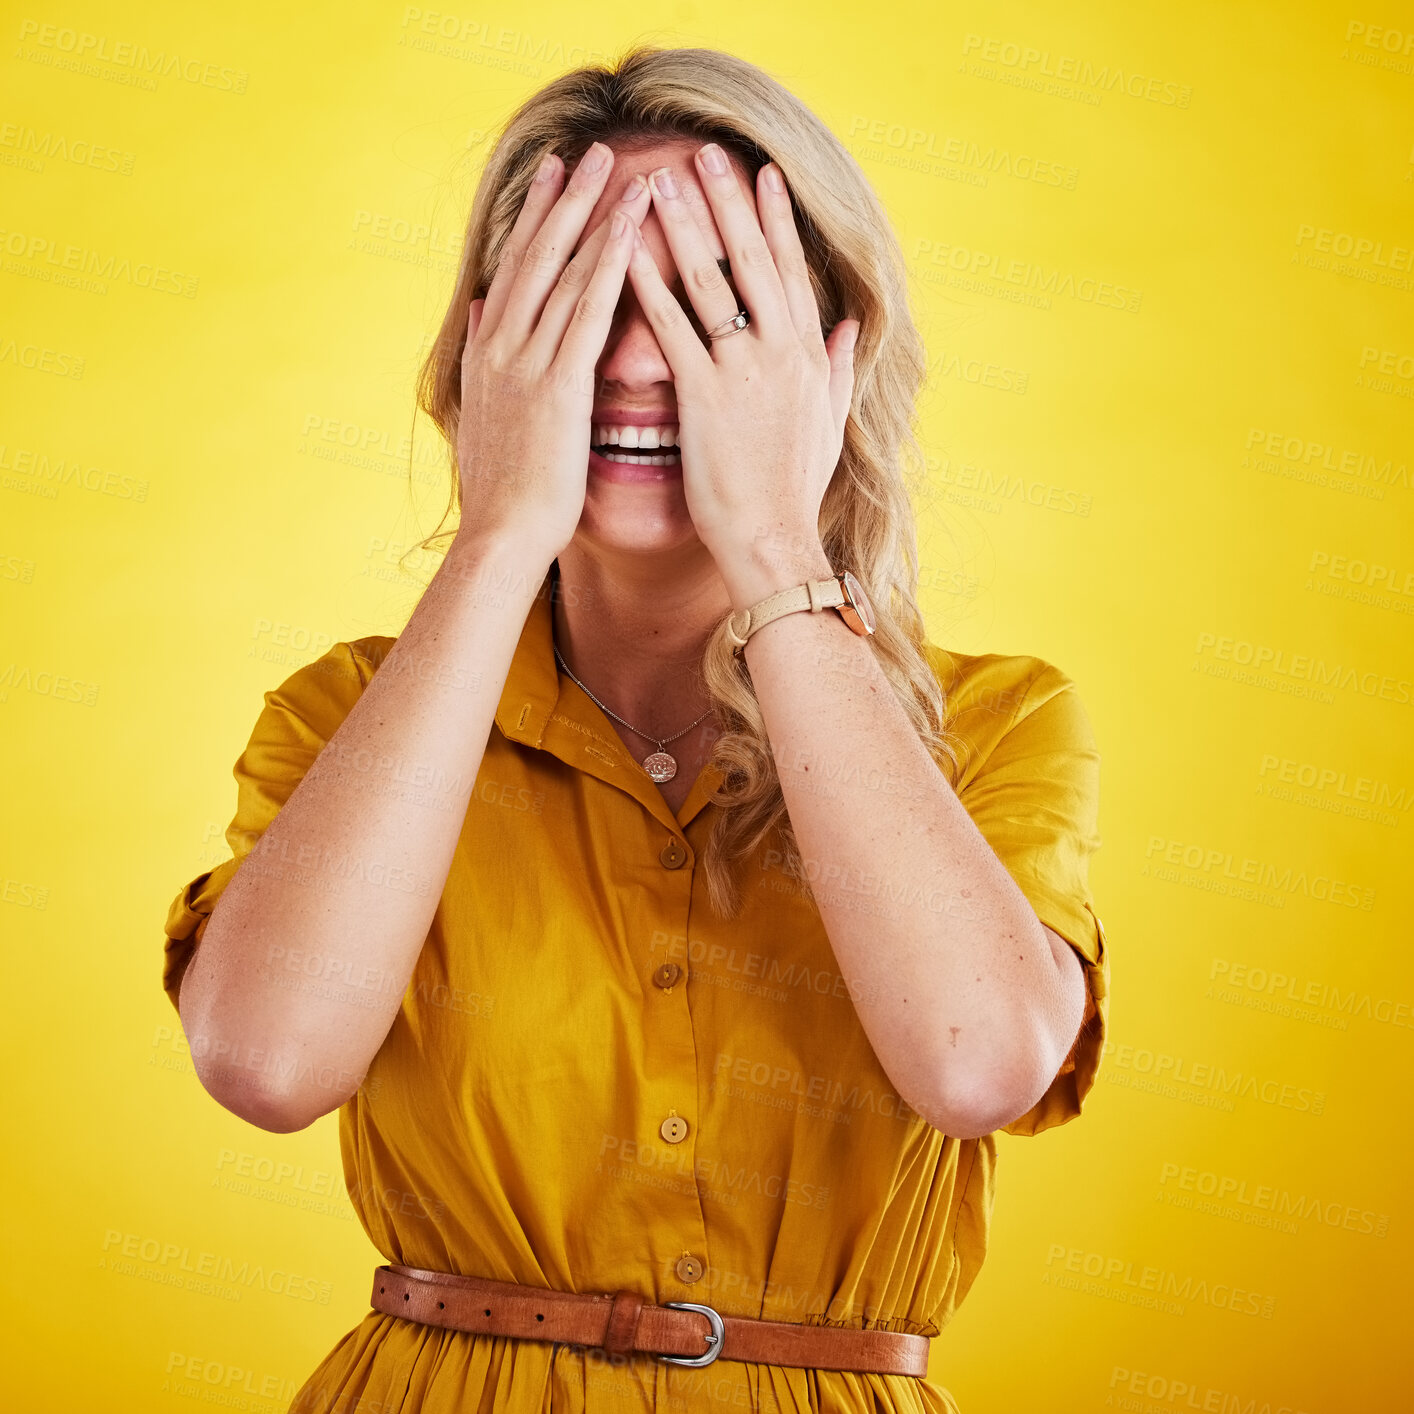 Buy stock photo Comic, funny and embarrassed with a woman on a yellow background in studio laughing at a joke. Smile, comedy and humor with a person enjoying laughter or fun while covering her face in expression